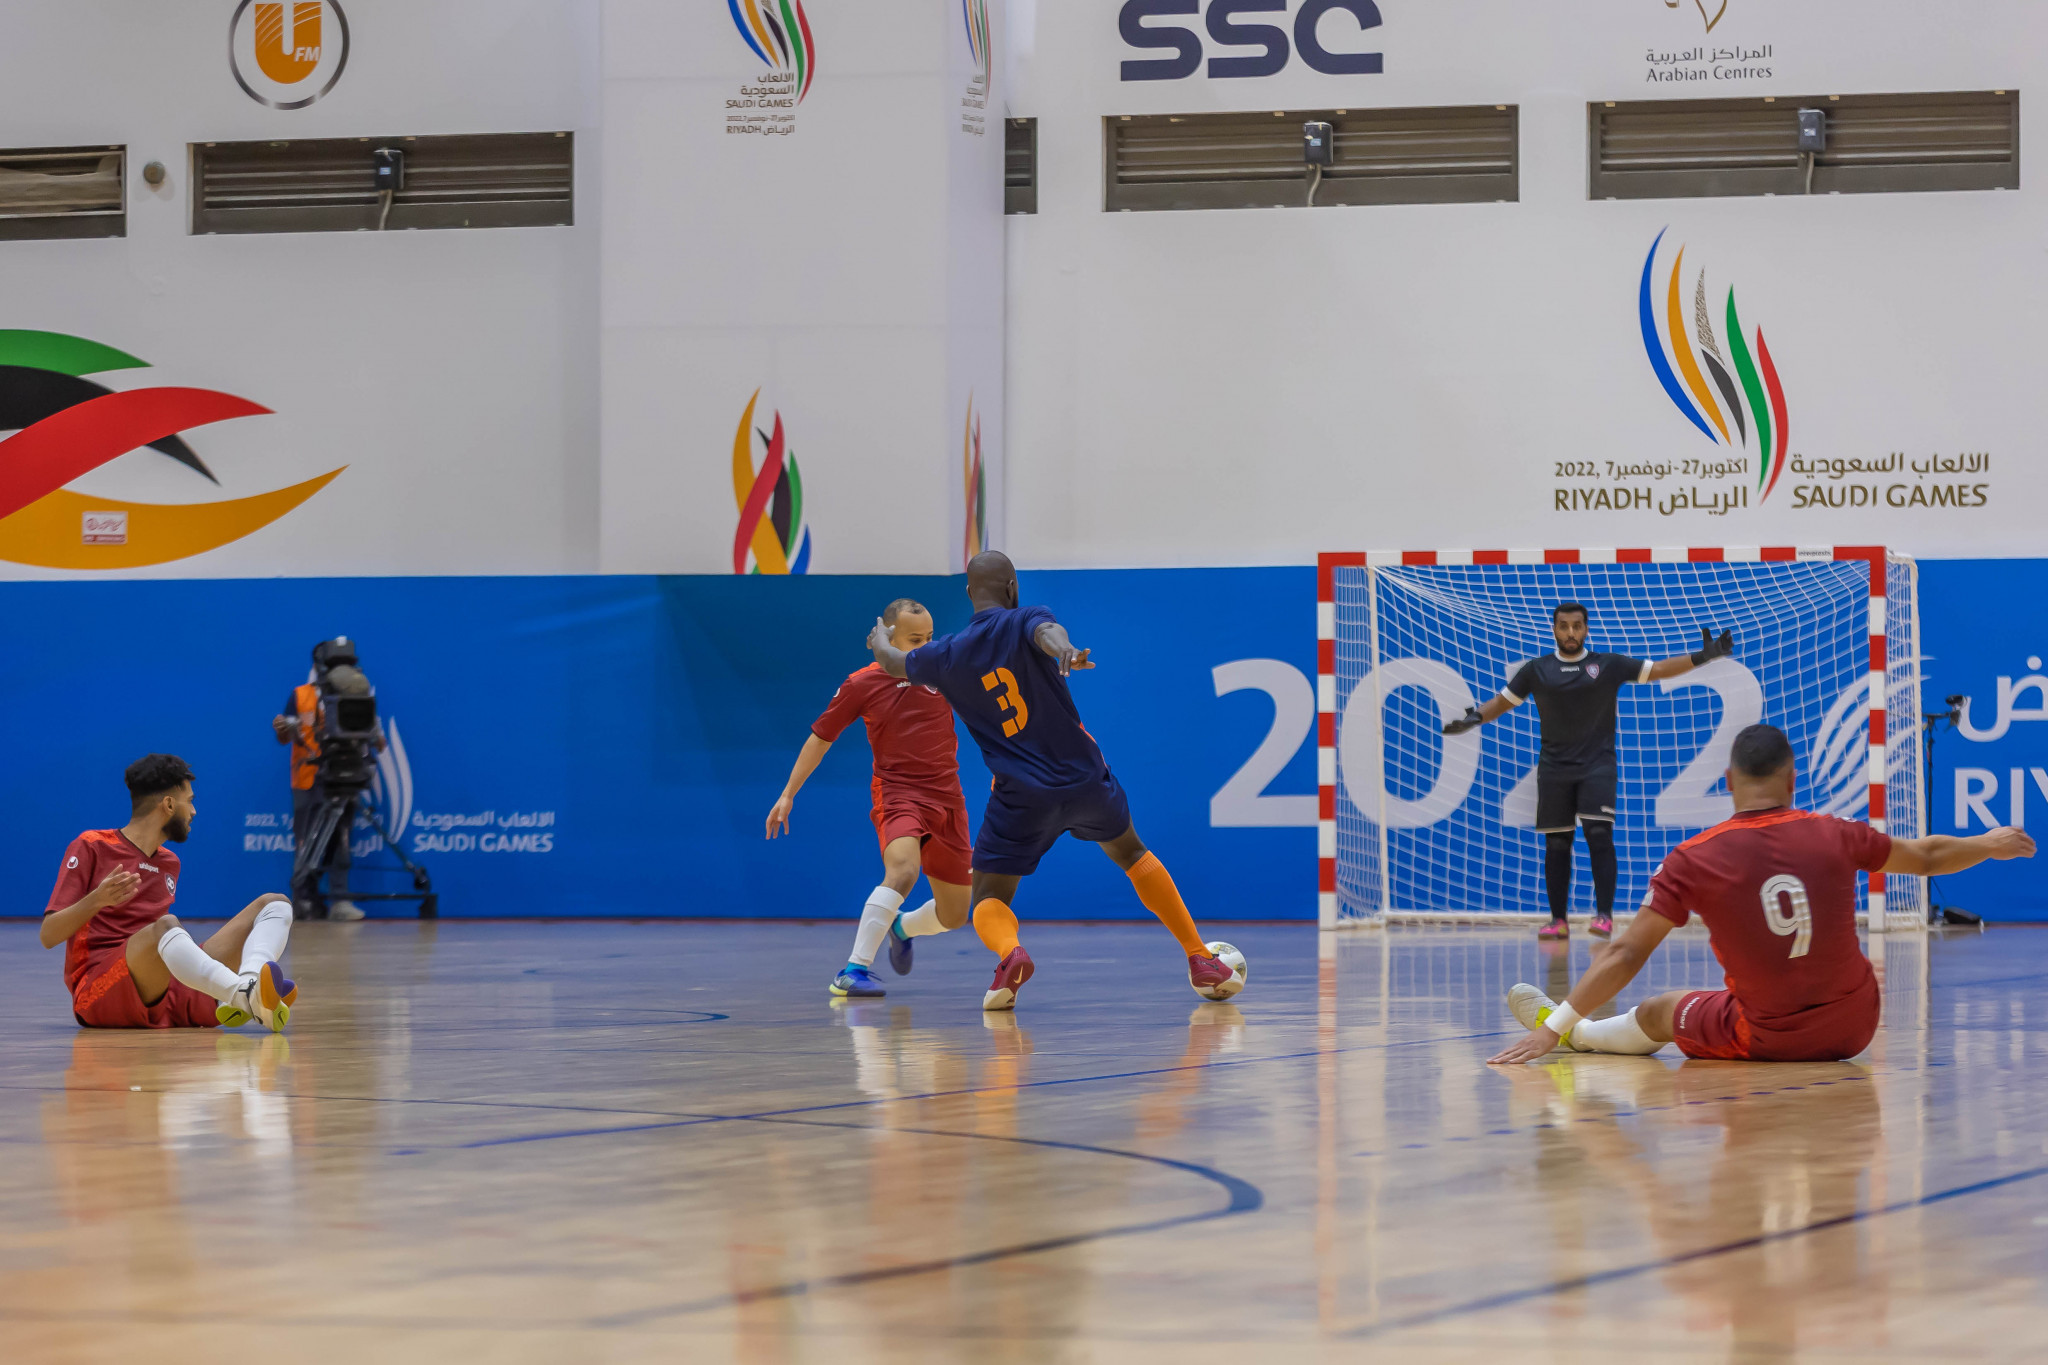 The final group matches in futsal were held today ©Saudi Games